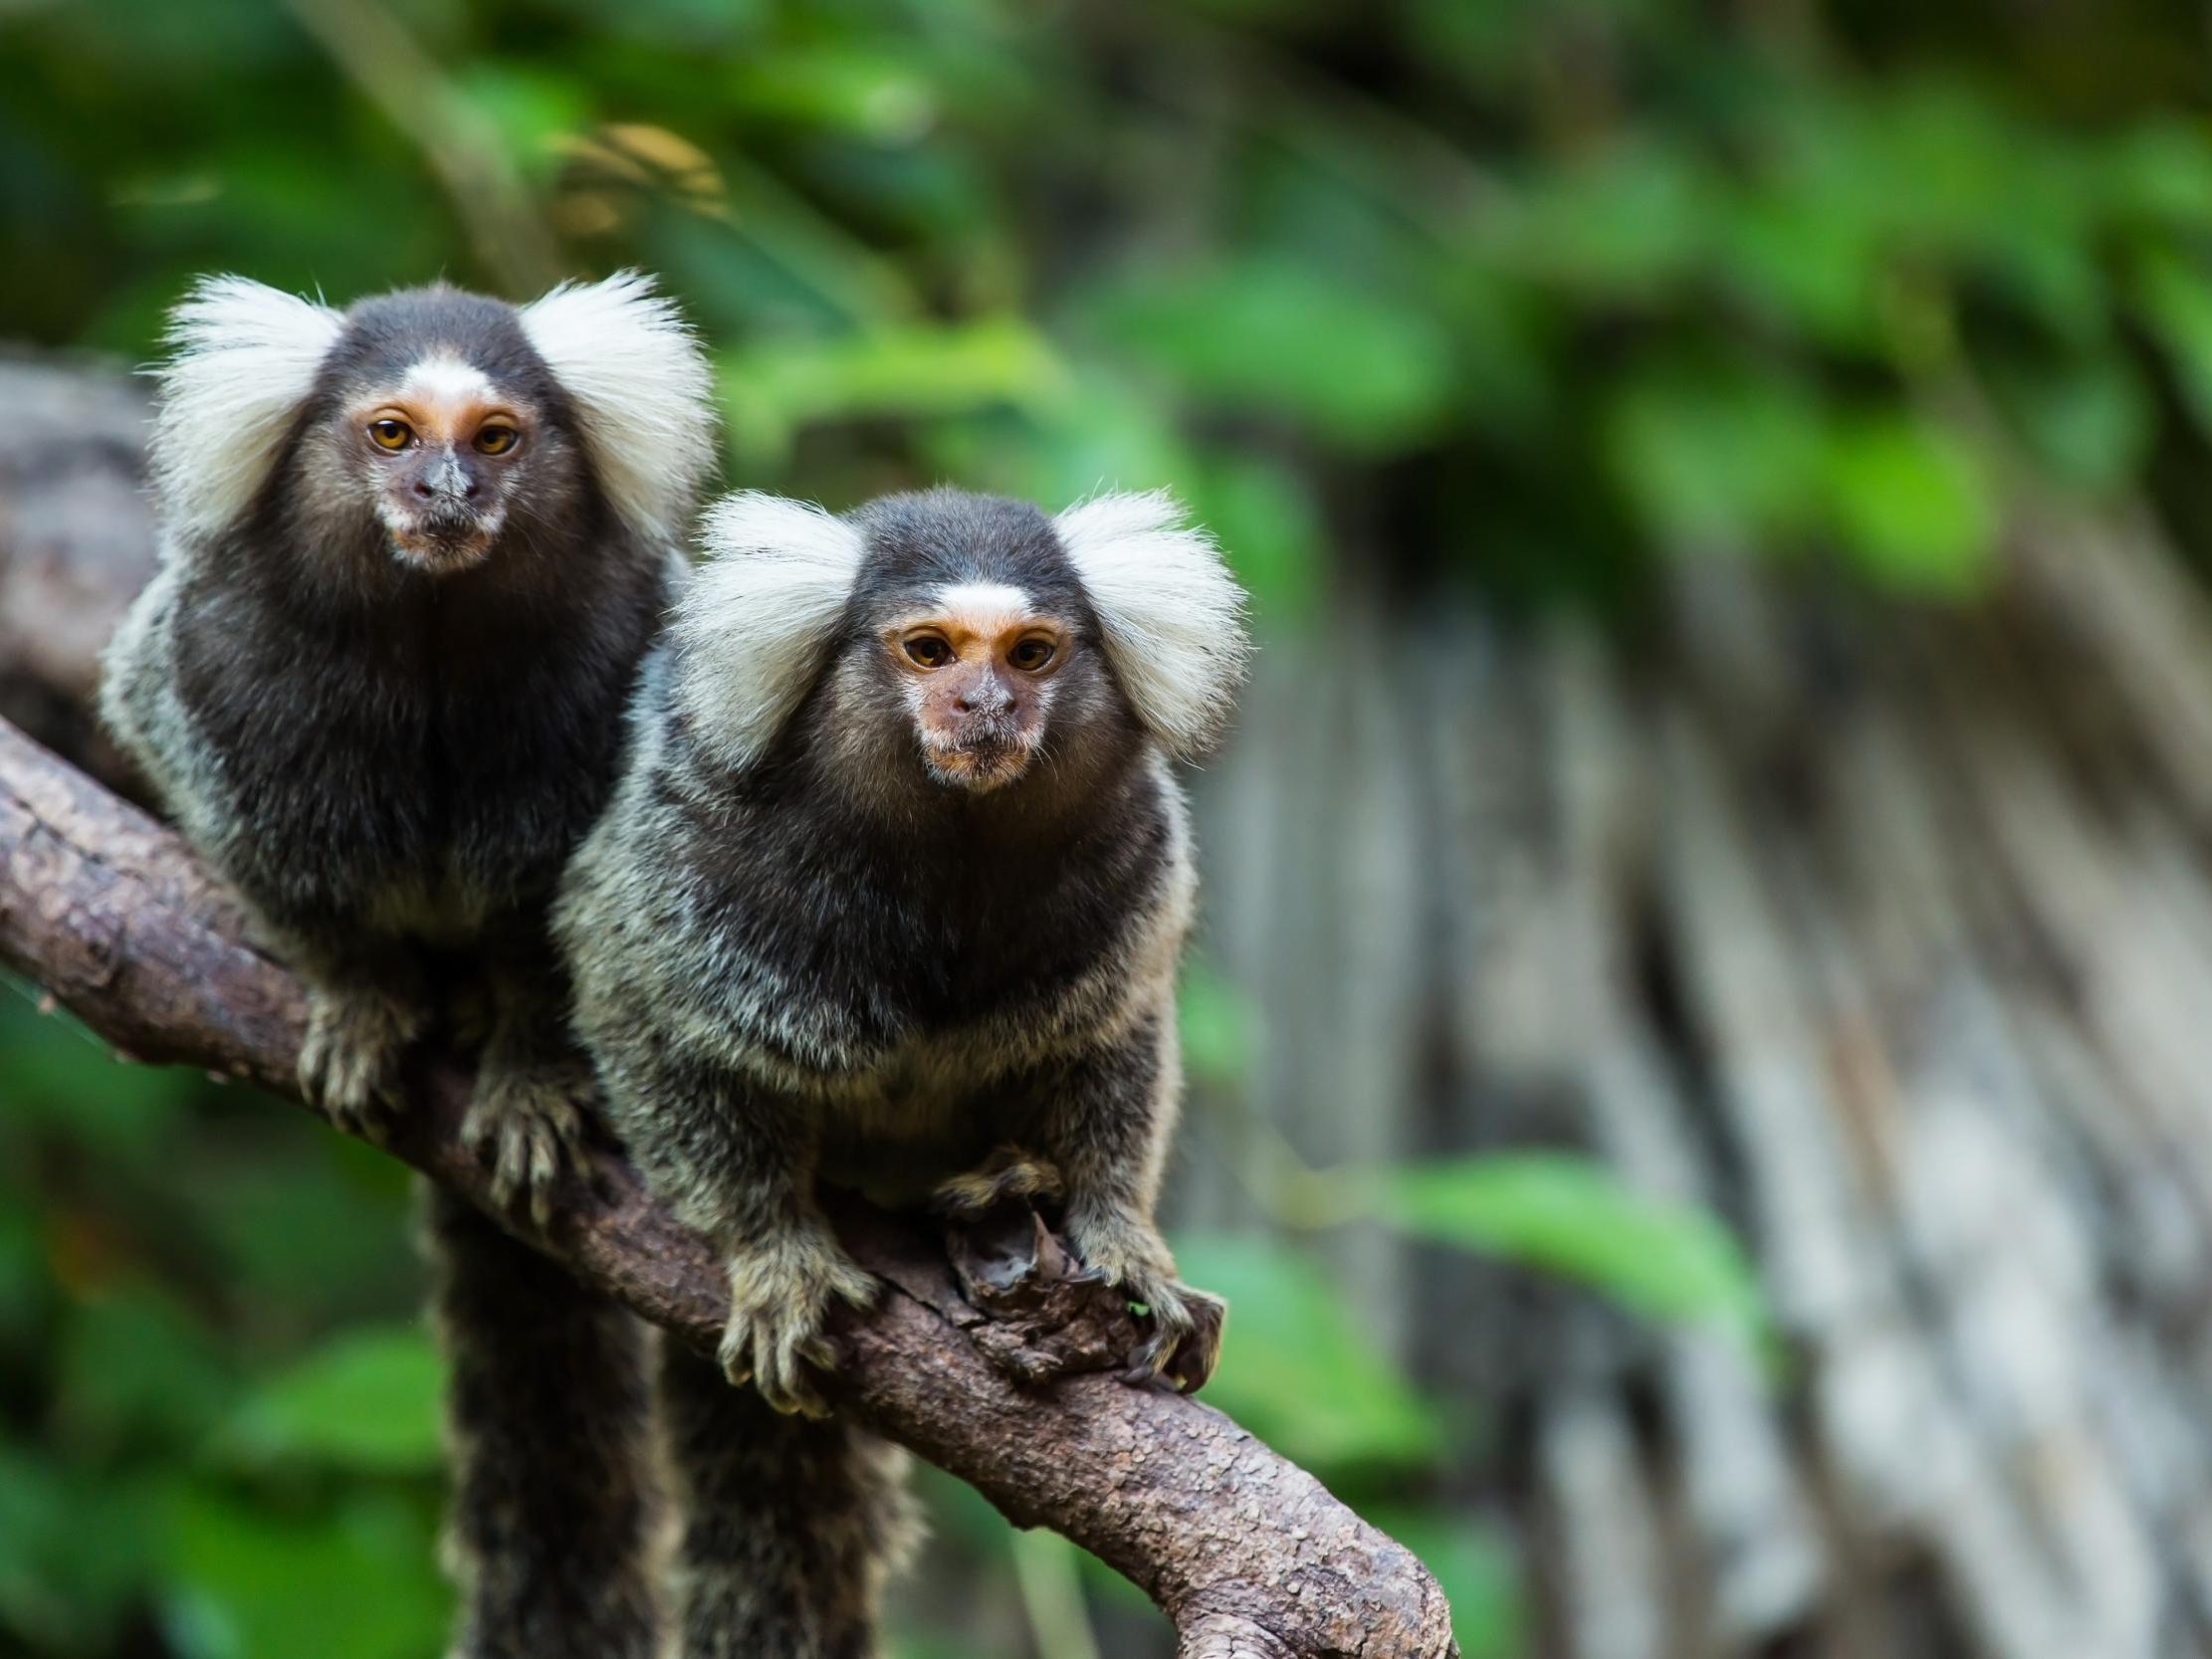 Scientists already knew that marmoset calls varied from one region to the next but they didn’t know why